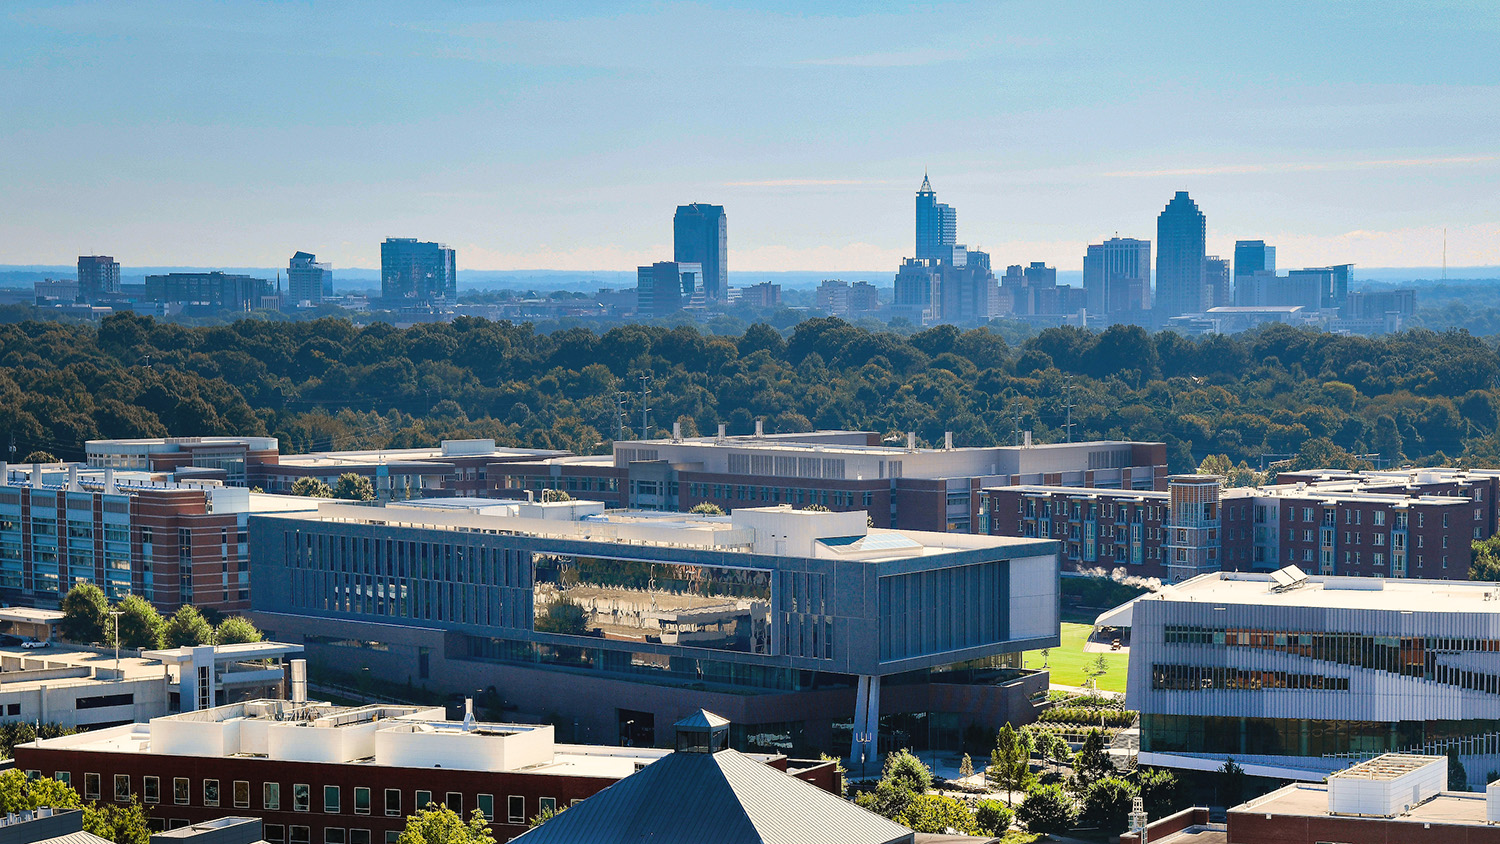 An aerial photo shows Centennial Campus buildings in the foreground and the Raleigh skyline in the background.